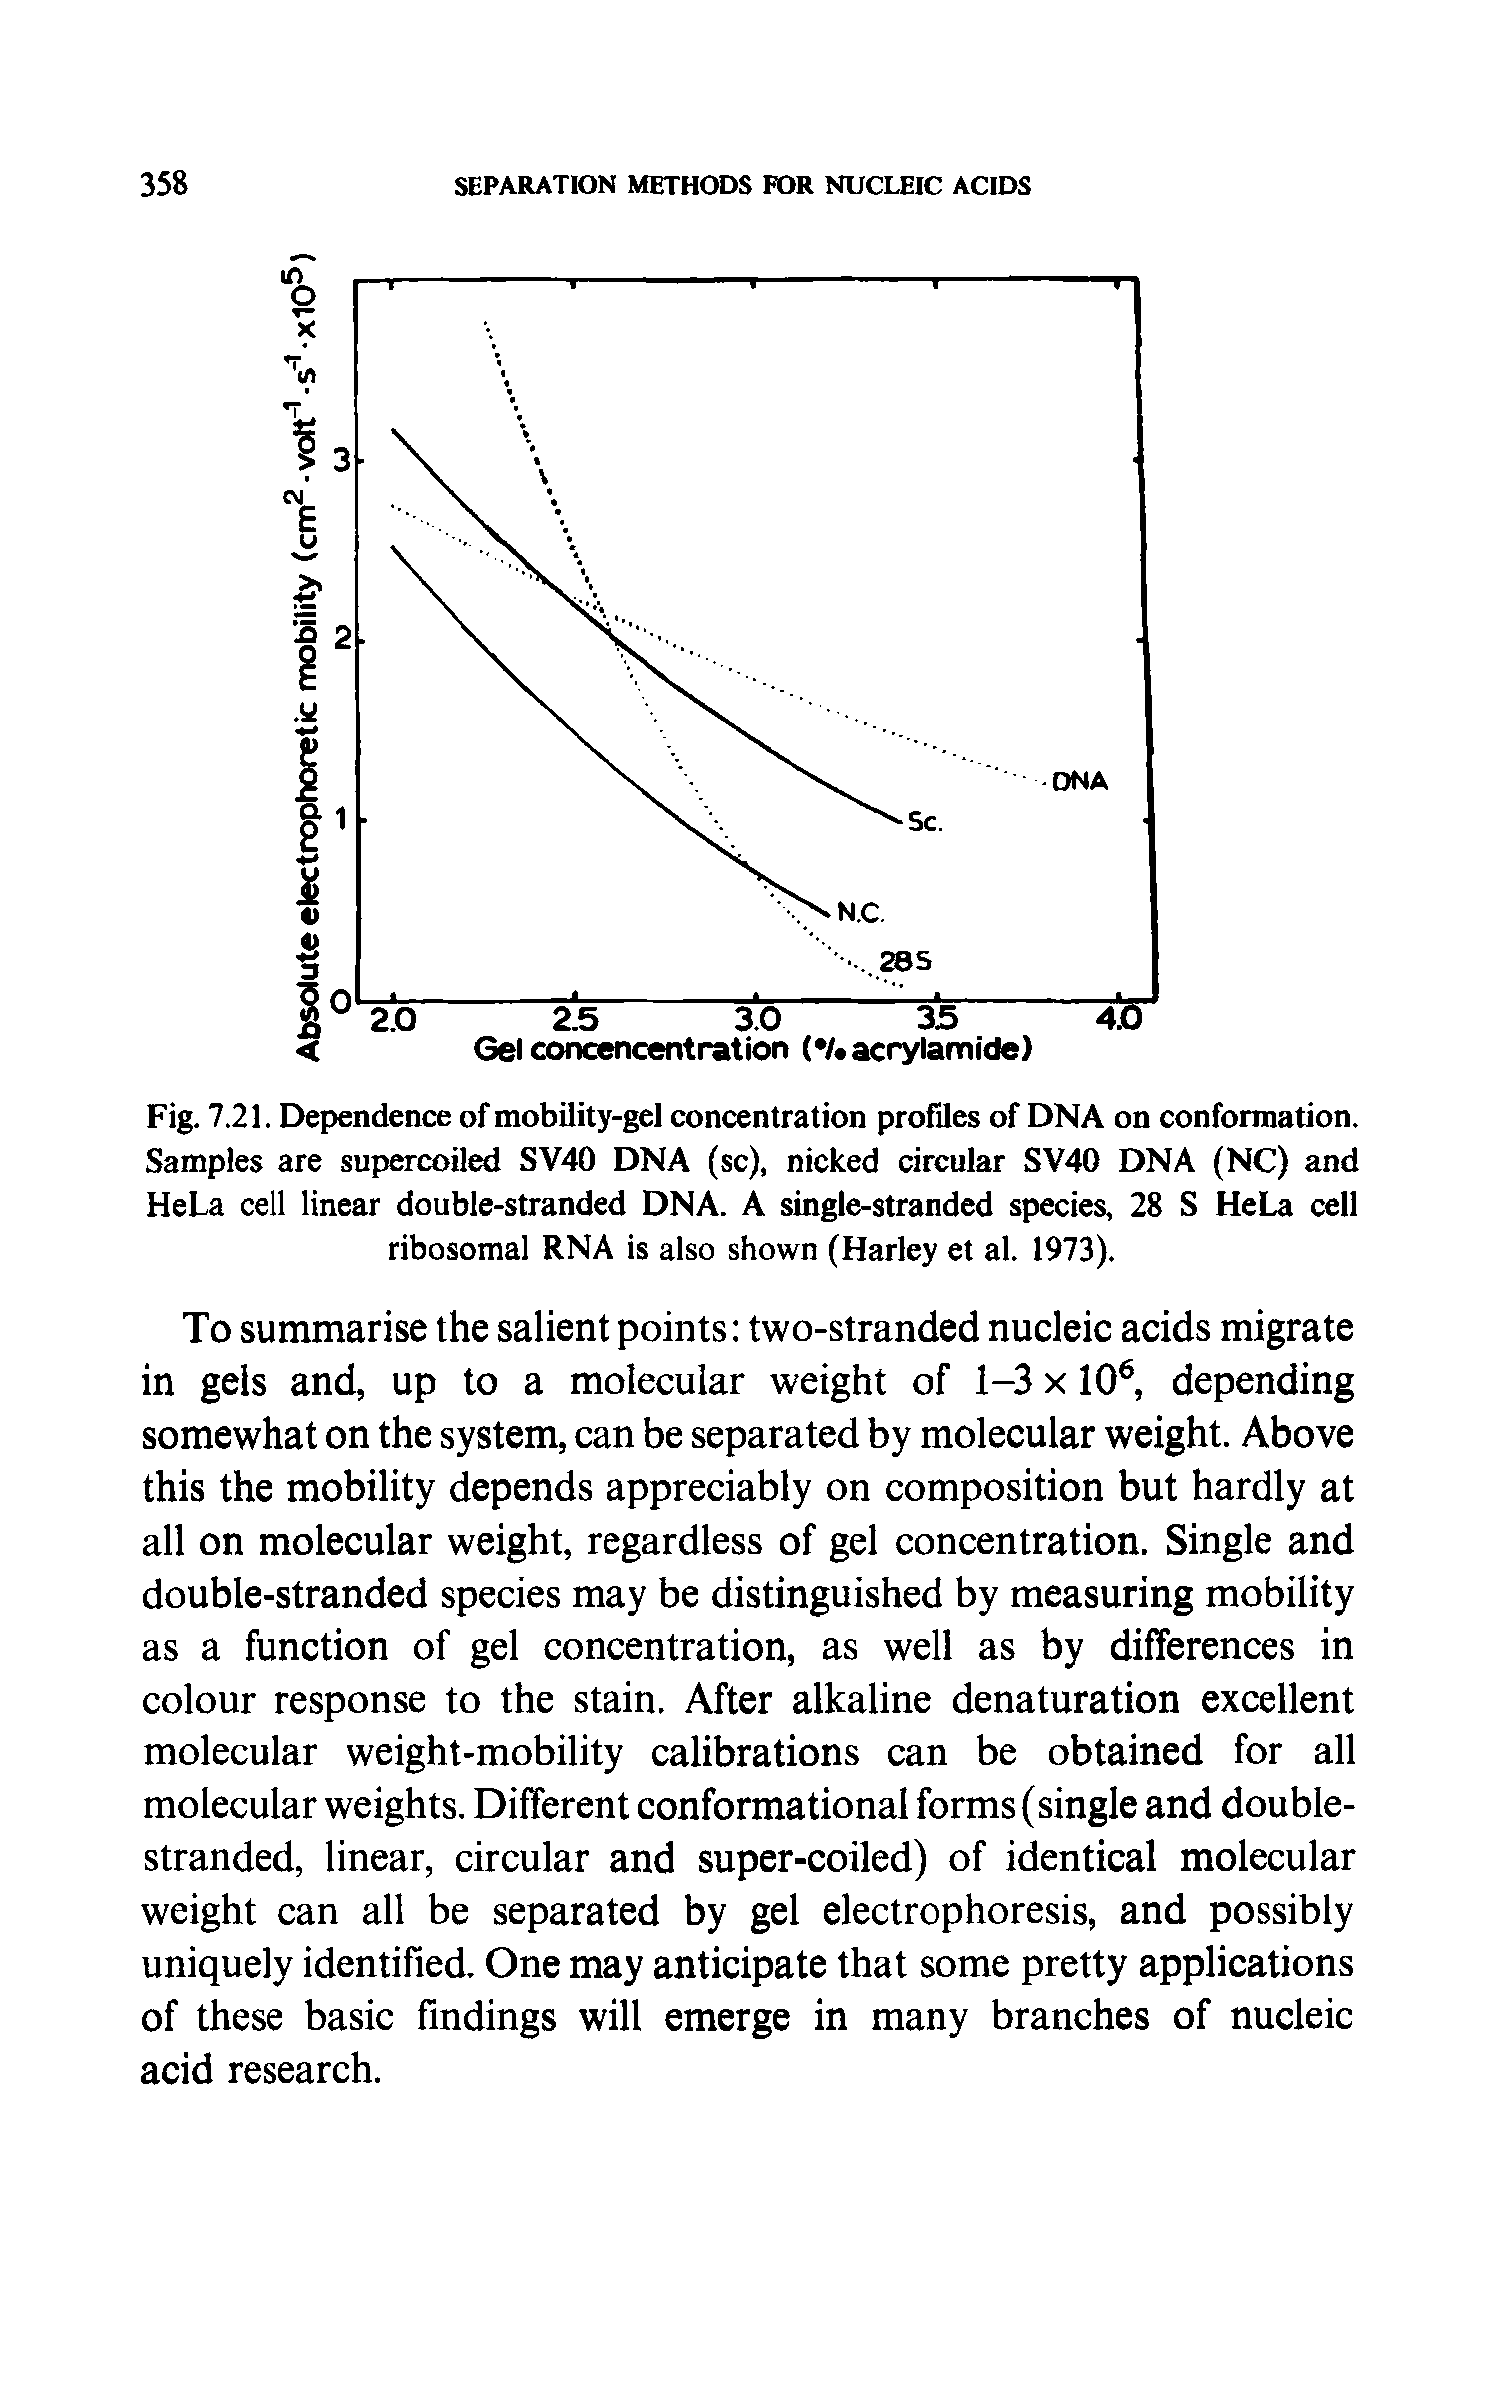 Fig. 7.21. Dependence of mobility-gel concentration profiles of DNA on conformation. Samples are supercoiled SV40 DNA (sc), nicked circular SV40 DNA (NC) and HeLa cell linear double-stranded DNA. A single-stranded species, 28 S HeLa cell ribosomal RNA is also shown (Harley et al. 1973).